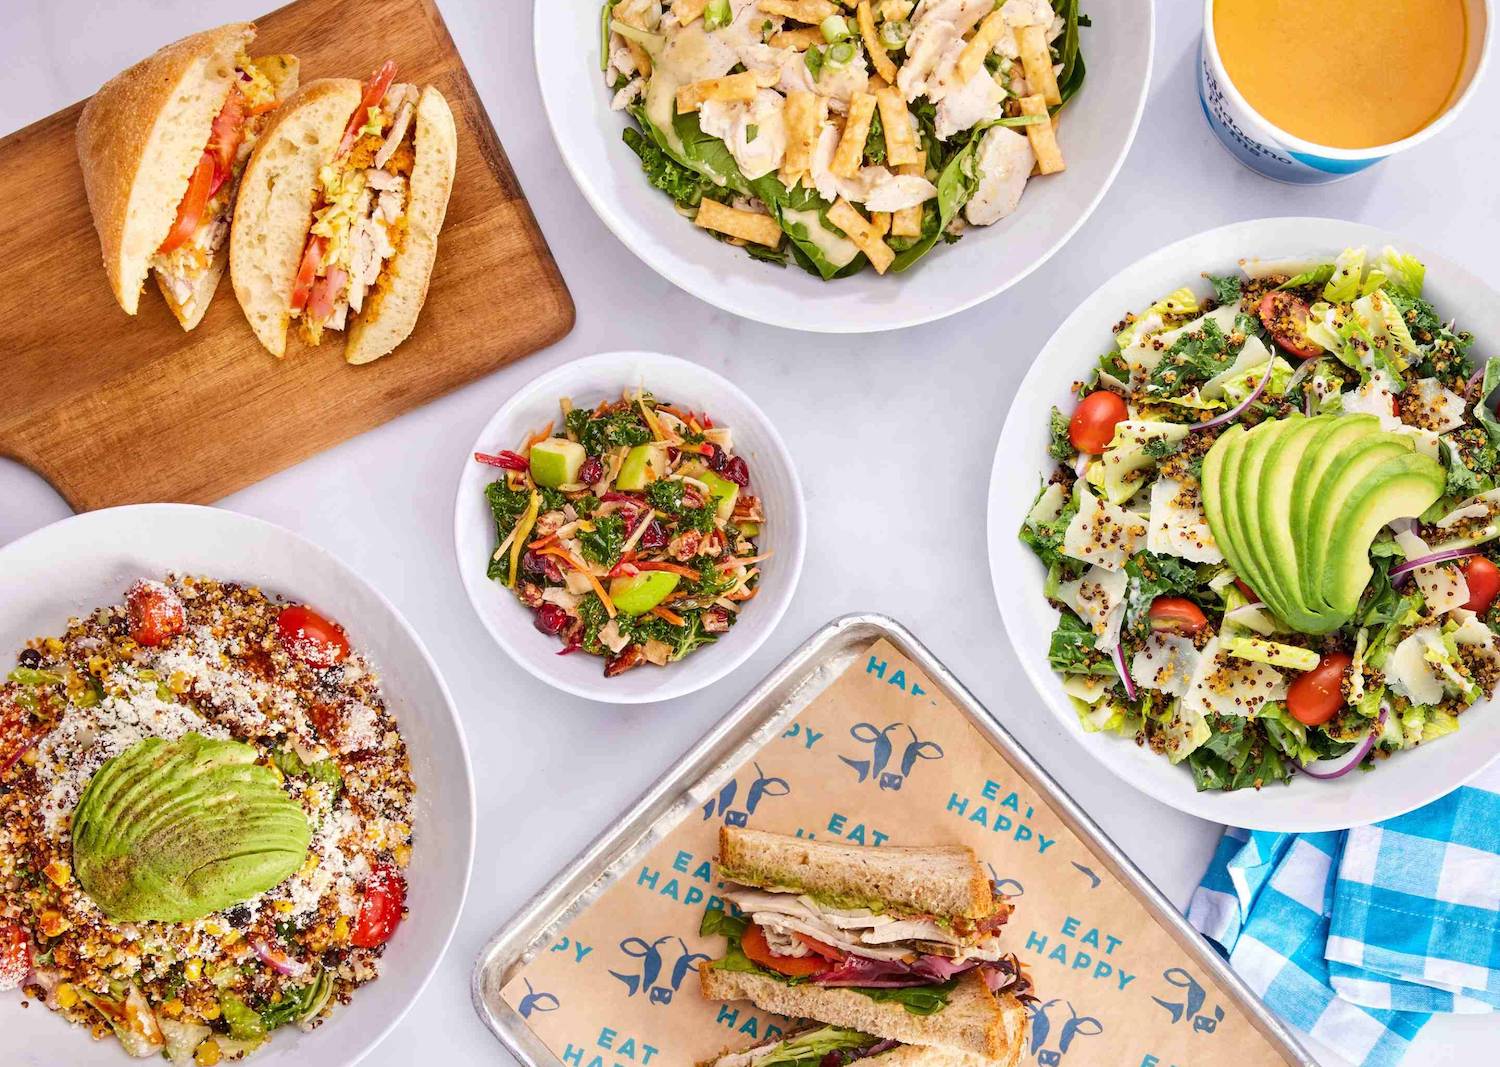 A table full of sadwiches, salads, and other food from food-chain Mendocino Farms which is opening a new location in Scripps Ranch